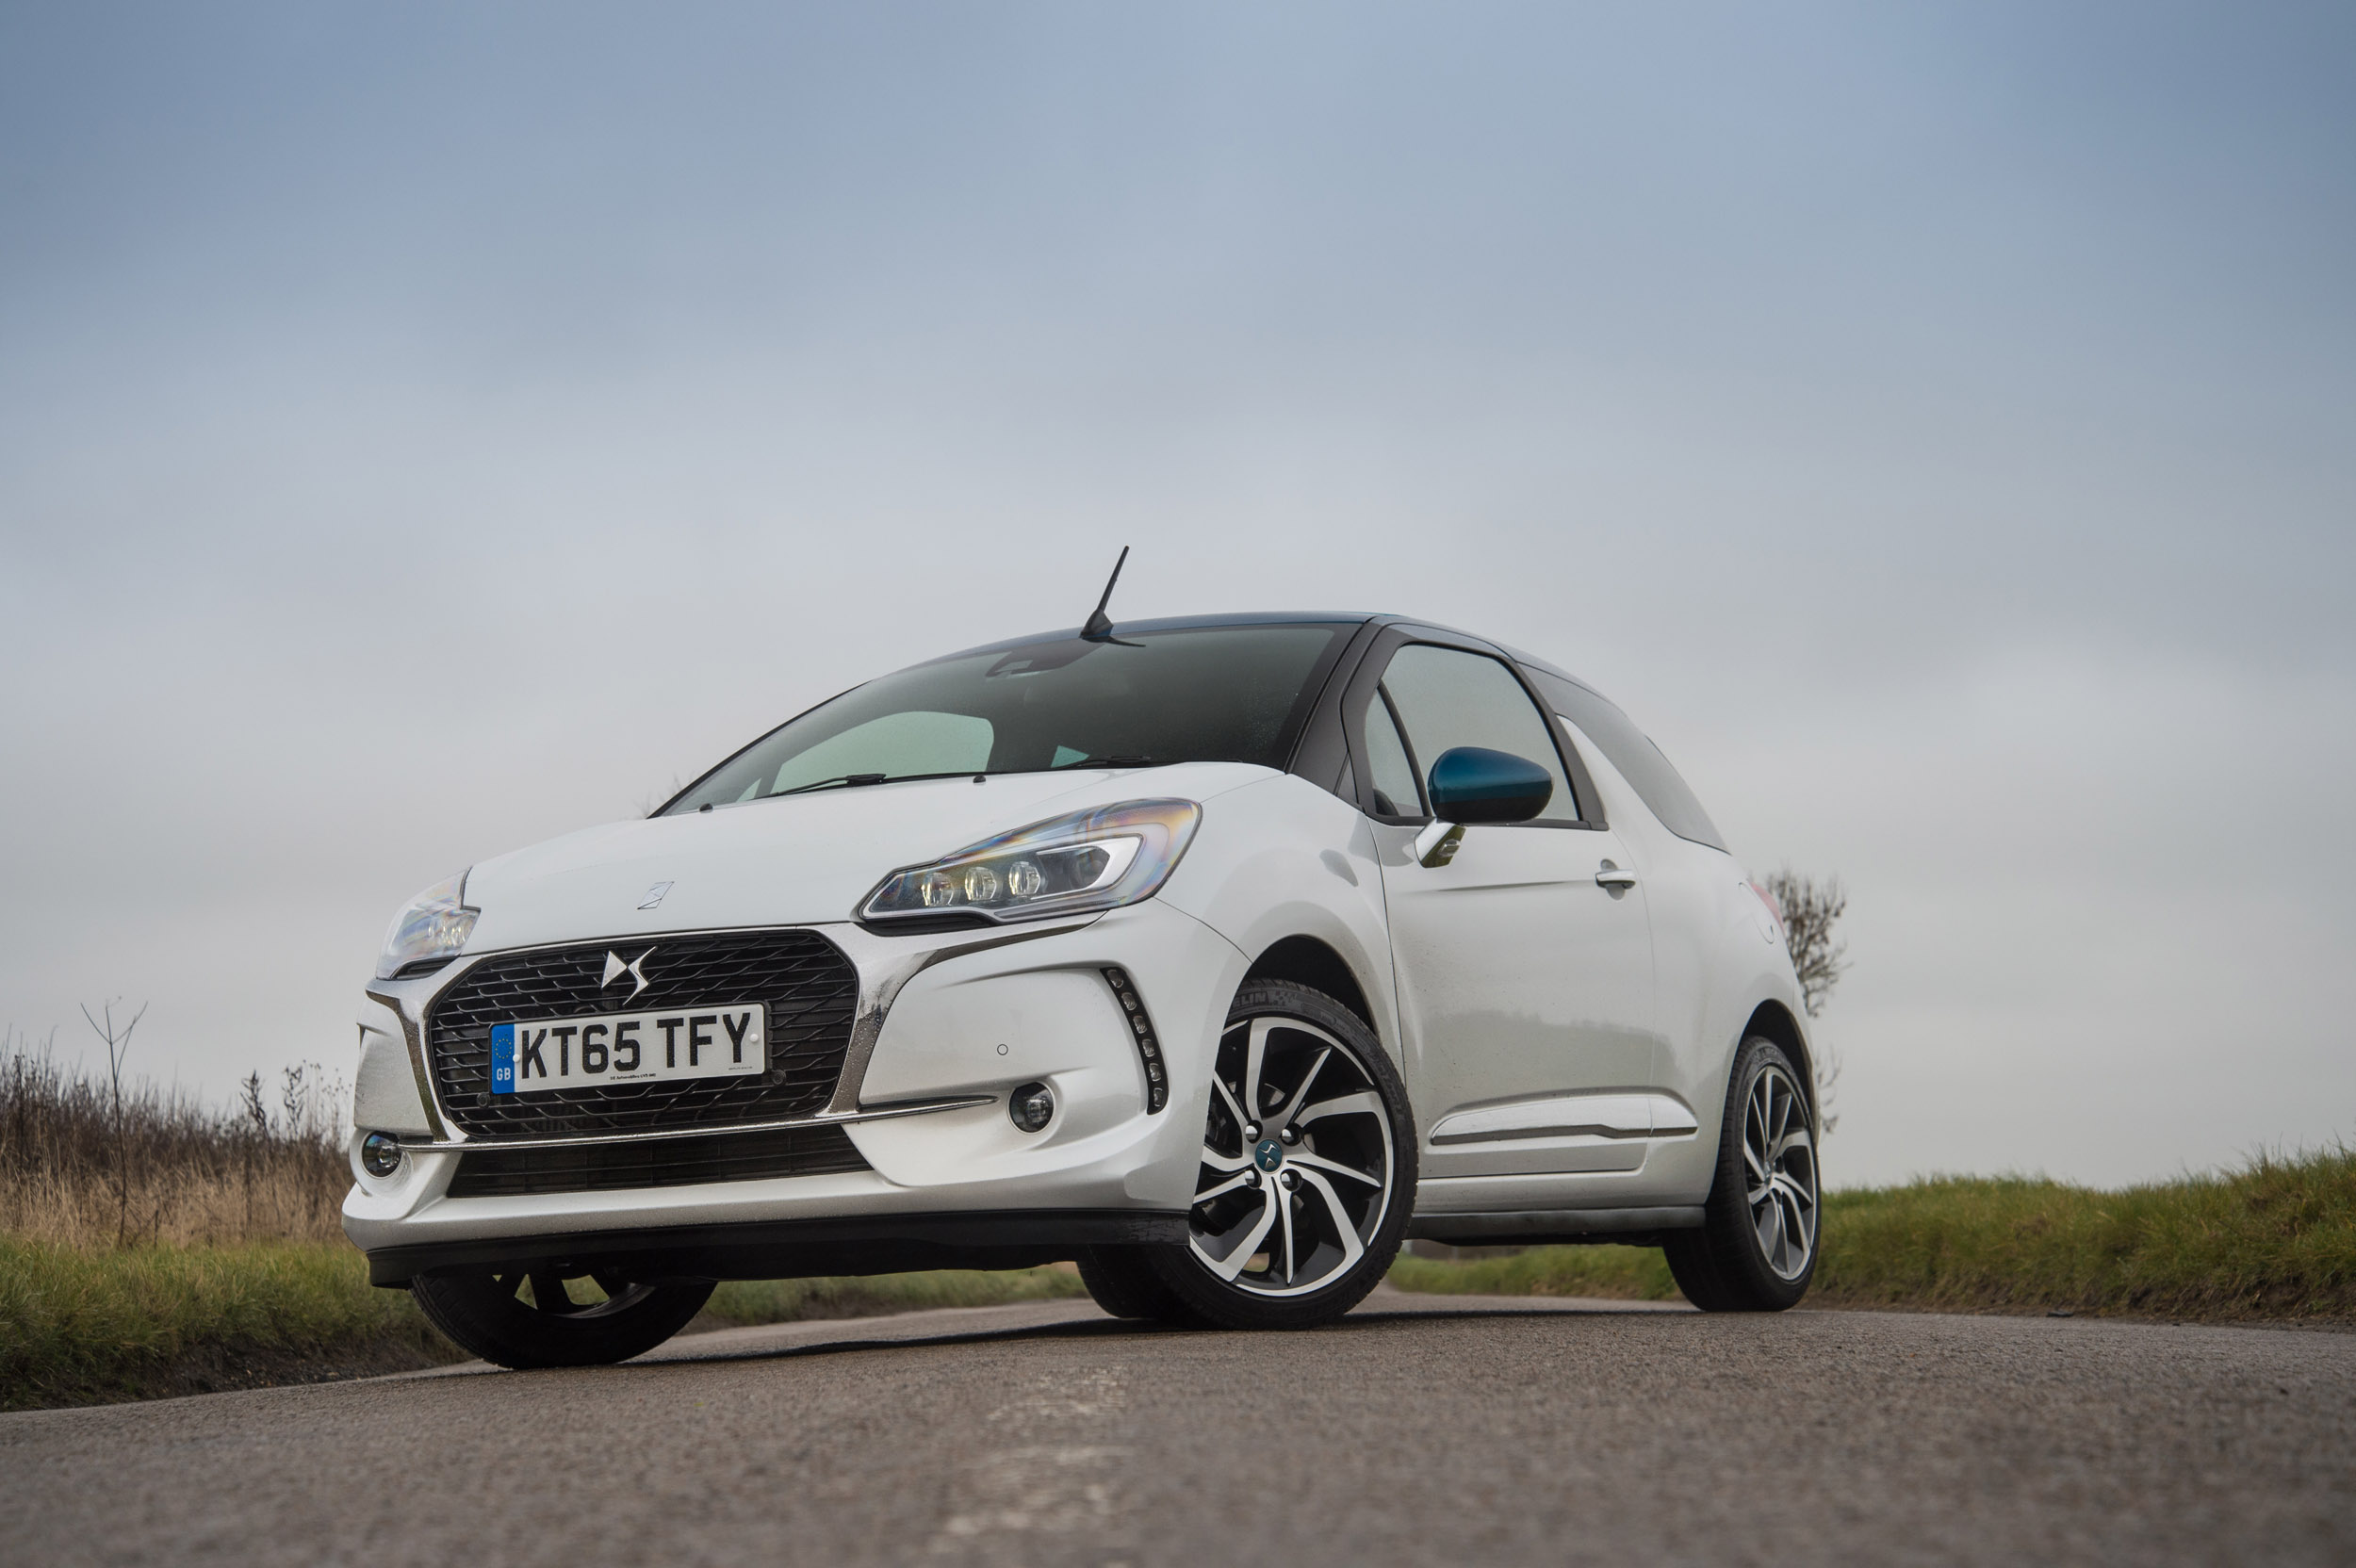 Citroen review - prices, specs and time | evo